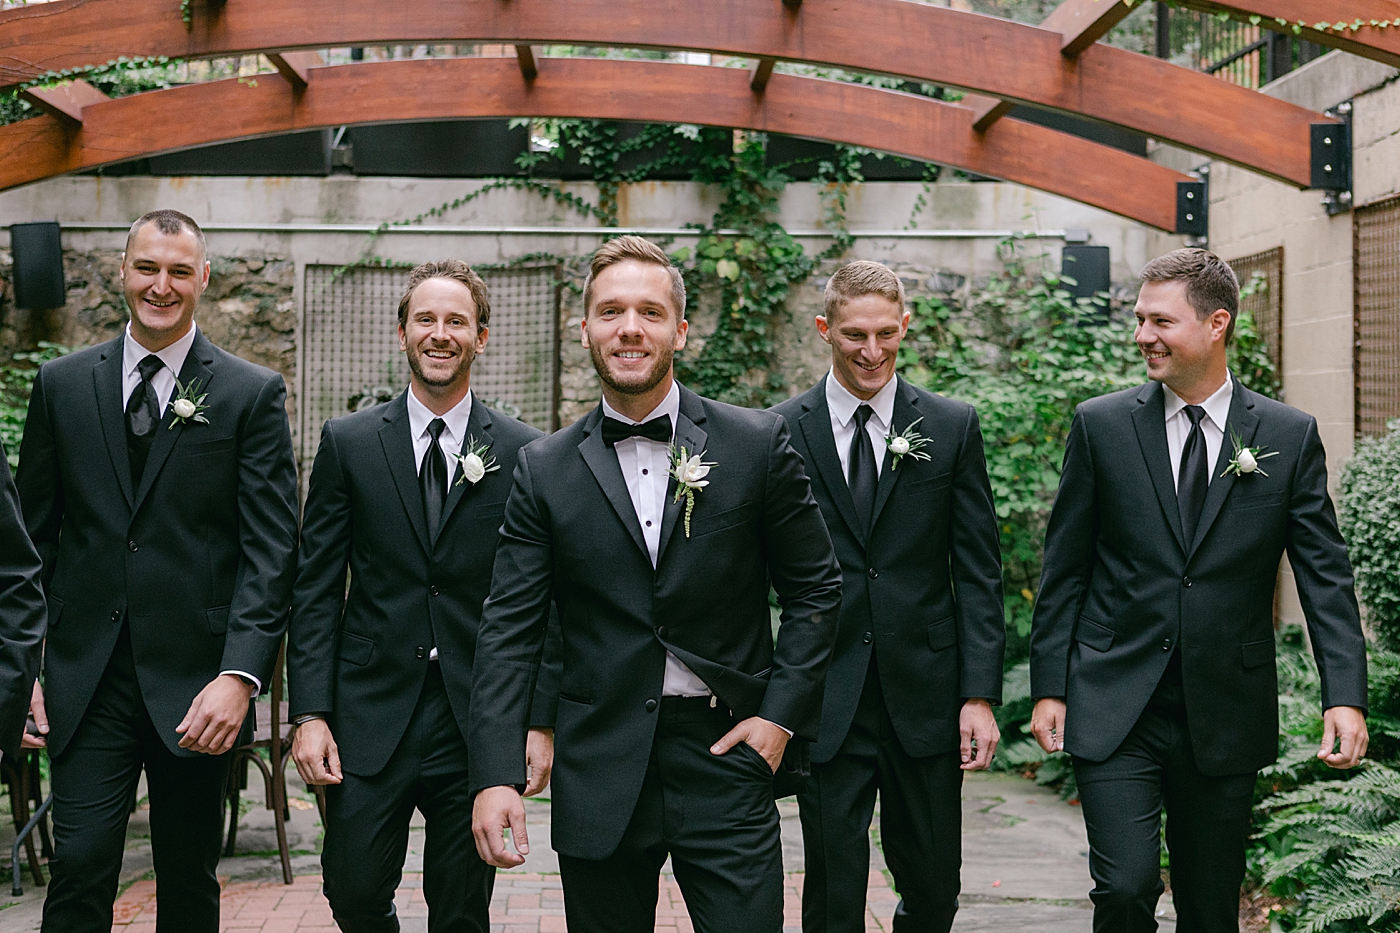 Groom having fun with groomsmen | Photo by Hope Helmuth Photography